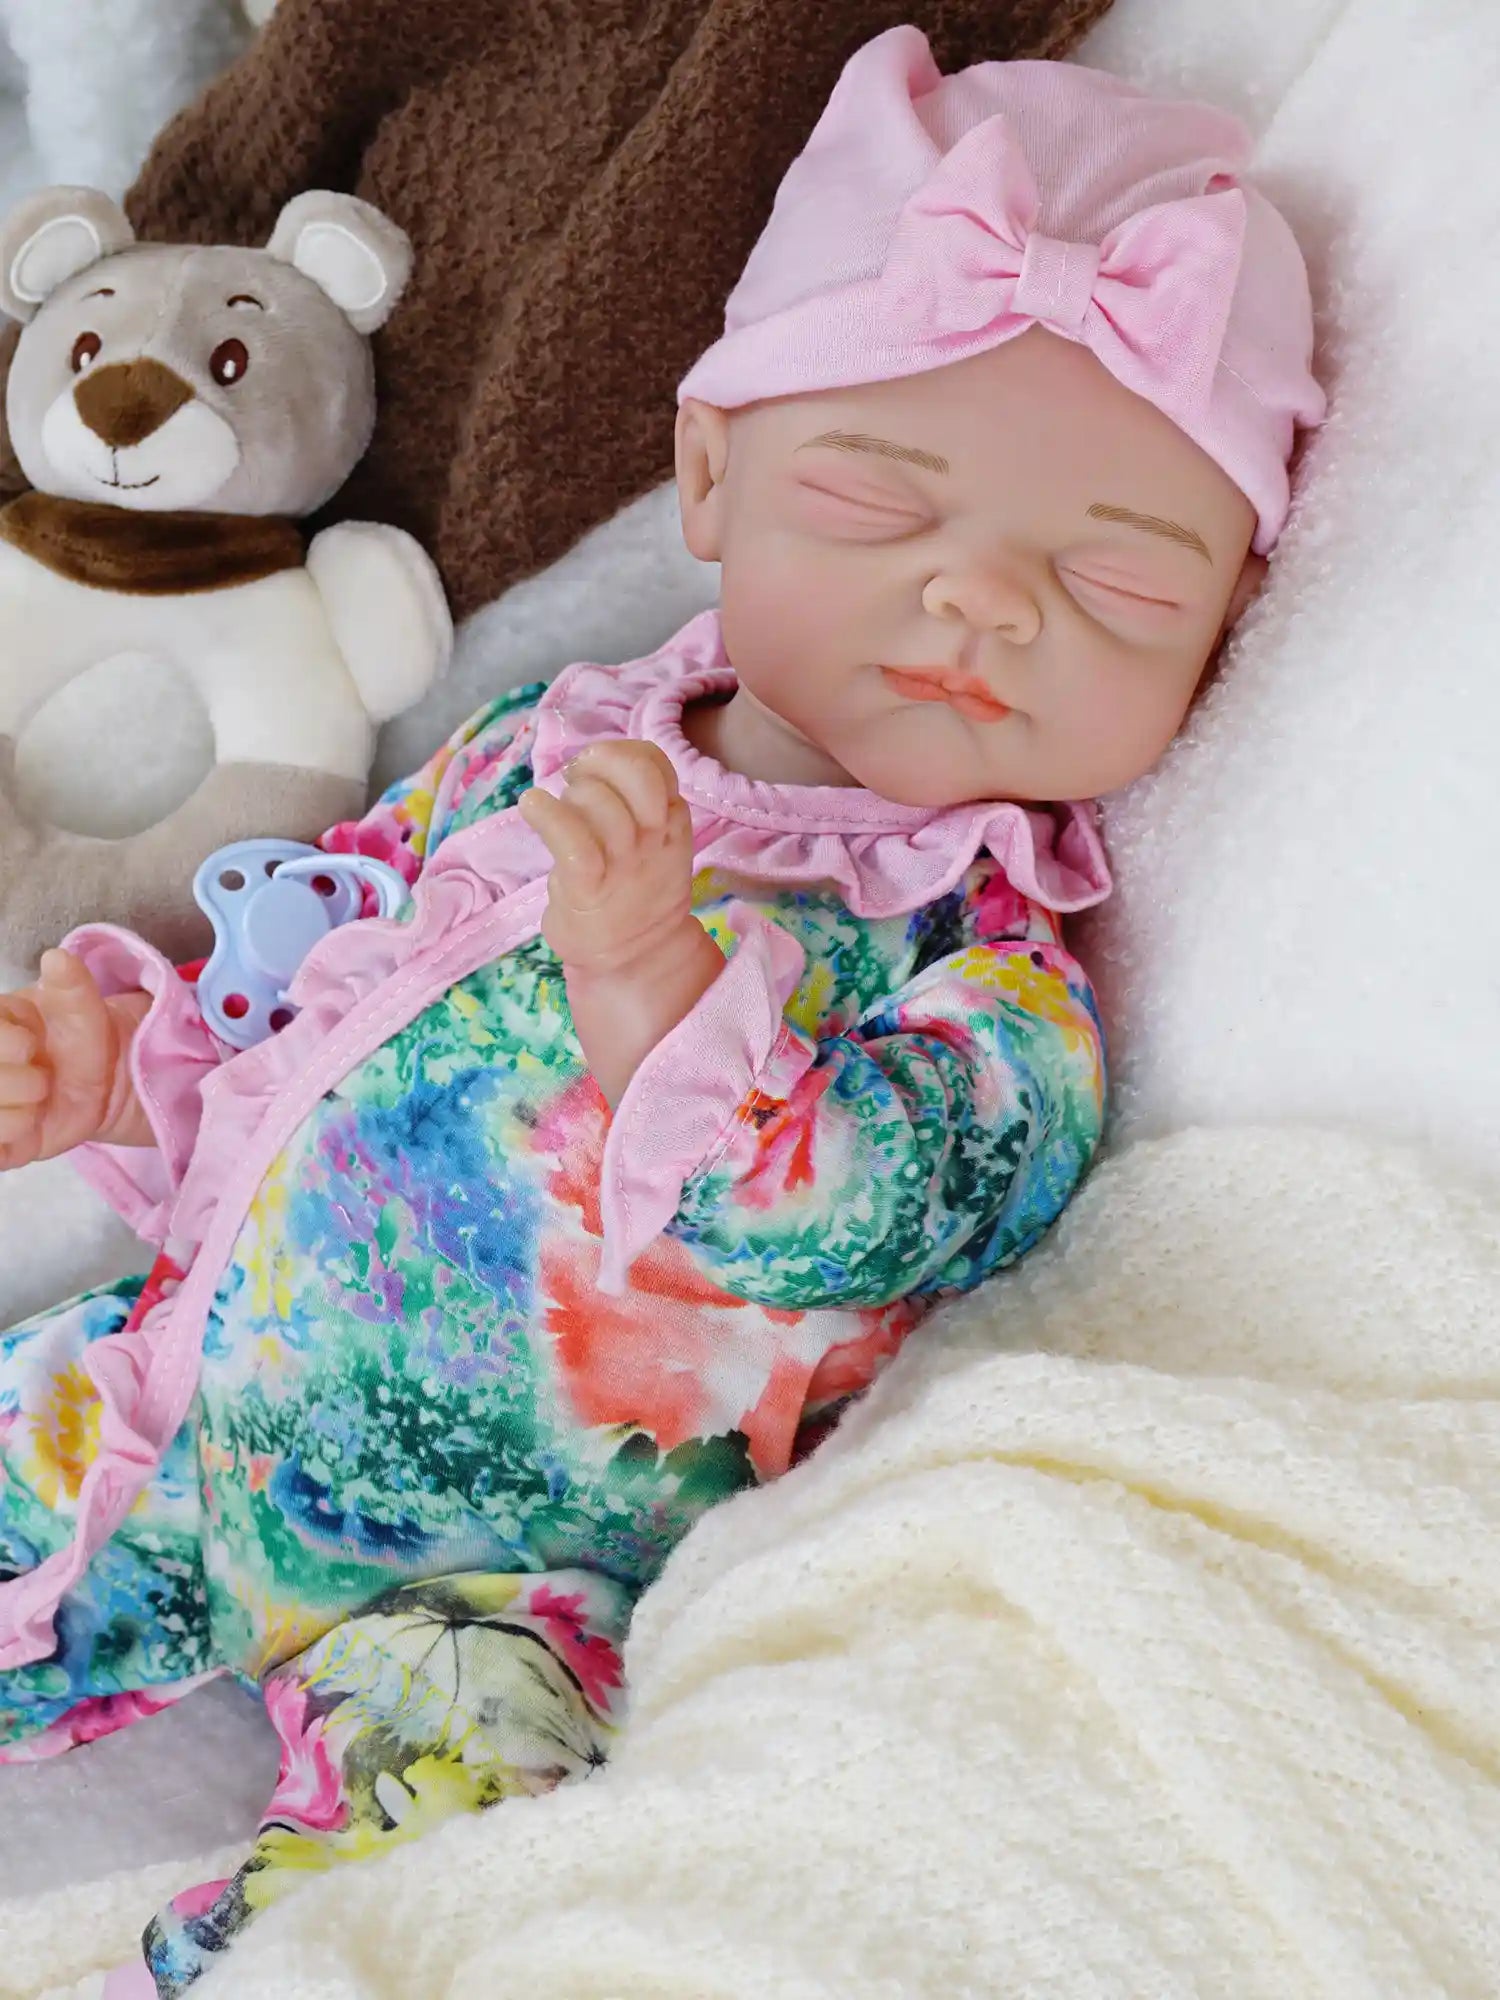 This image shows the same doll as the first, now covered with the cream blanket, the plush teddy bear nearby, and a blue pacifier placed next to her.